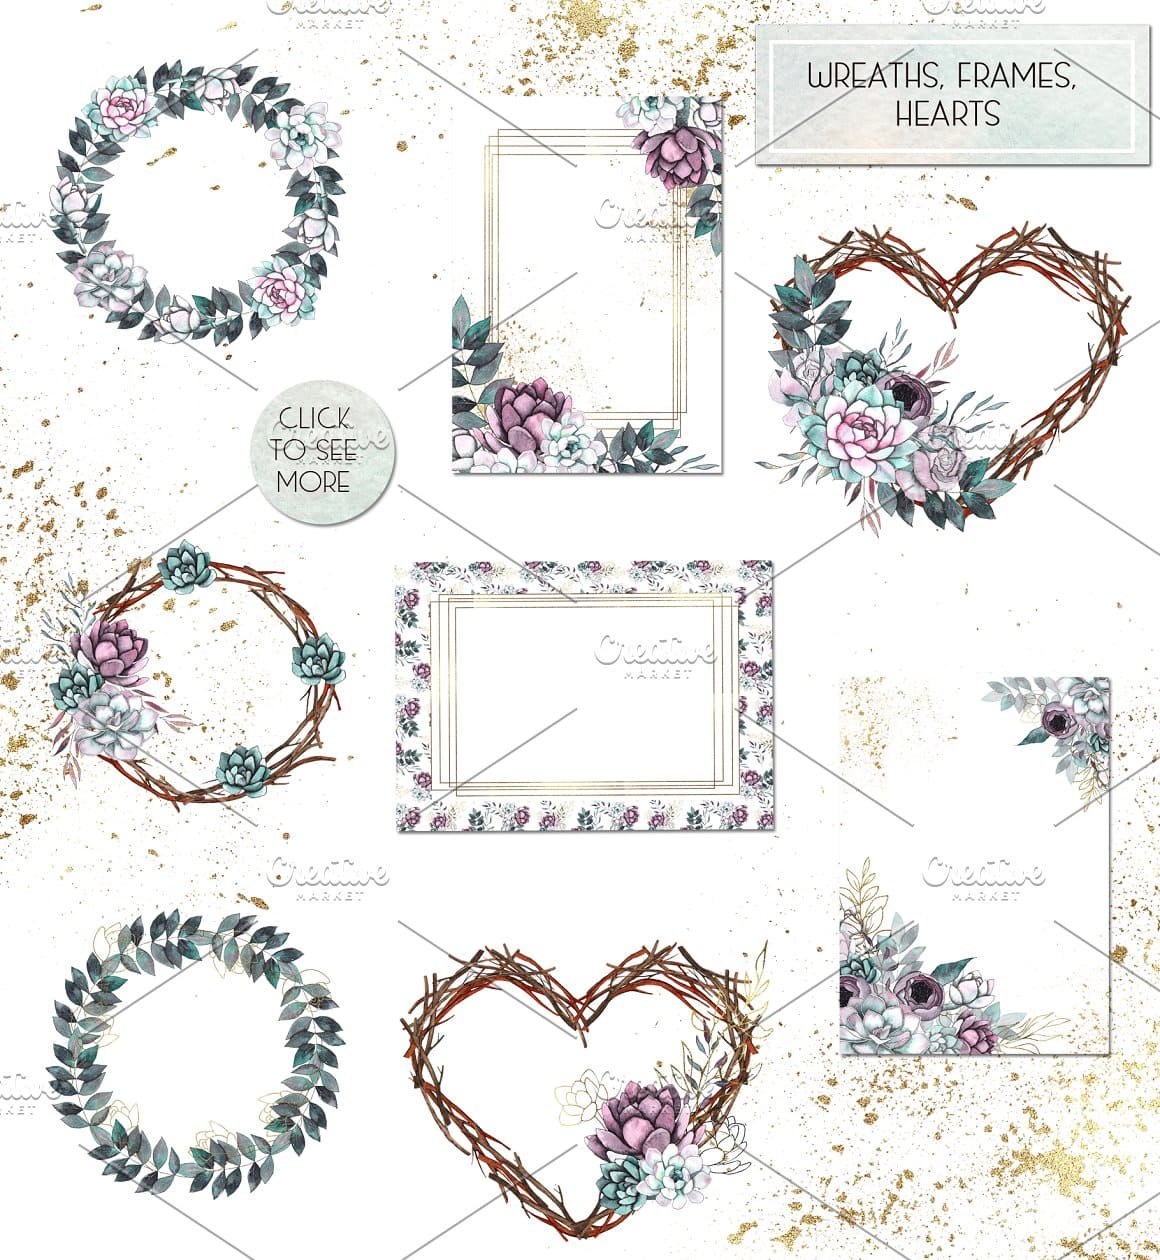 Wreaths, frames, hearts with floral decoration.